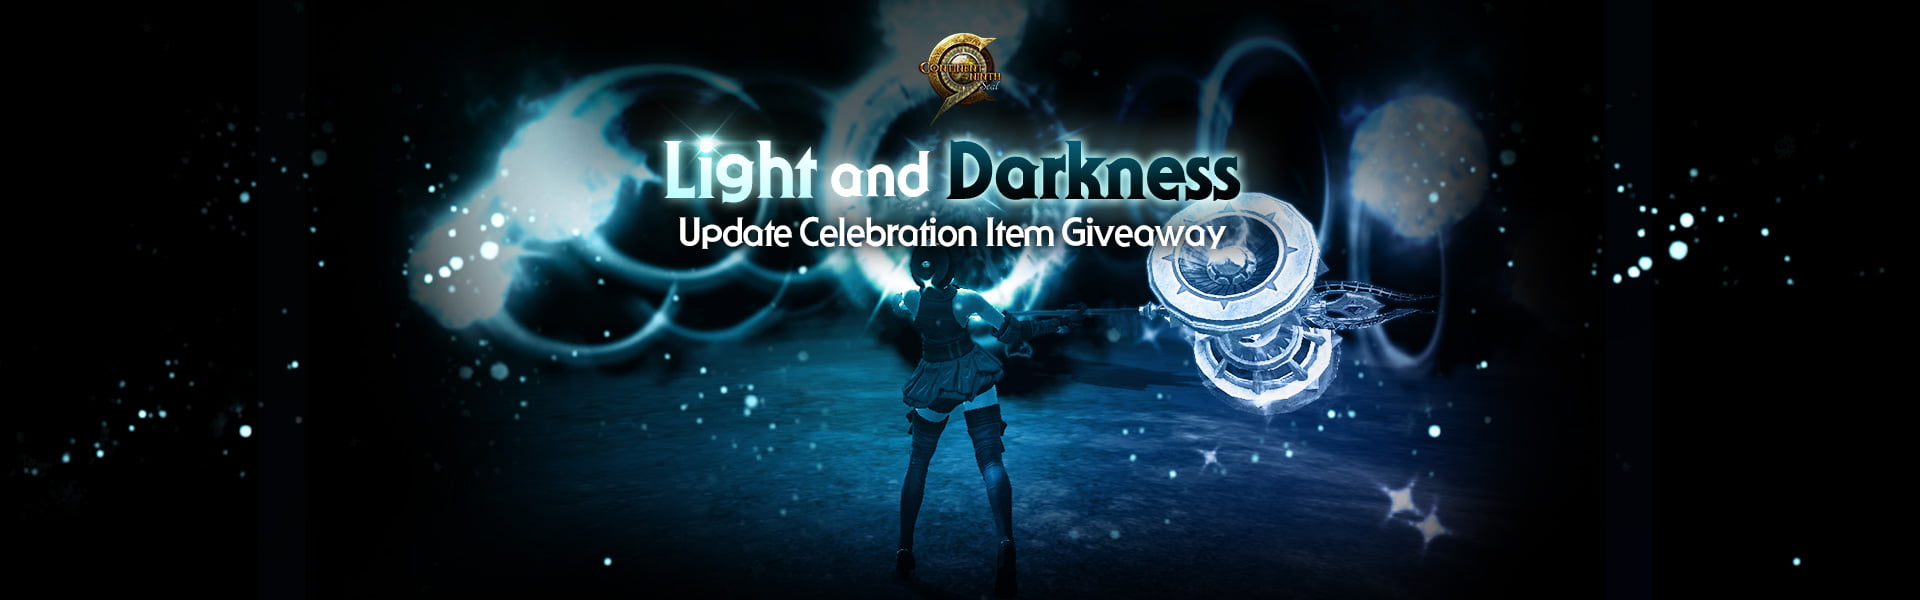 C9 Light and Darkness Update Celebration Gift Giveaway 4